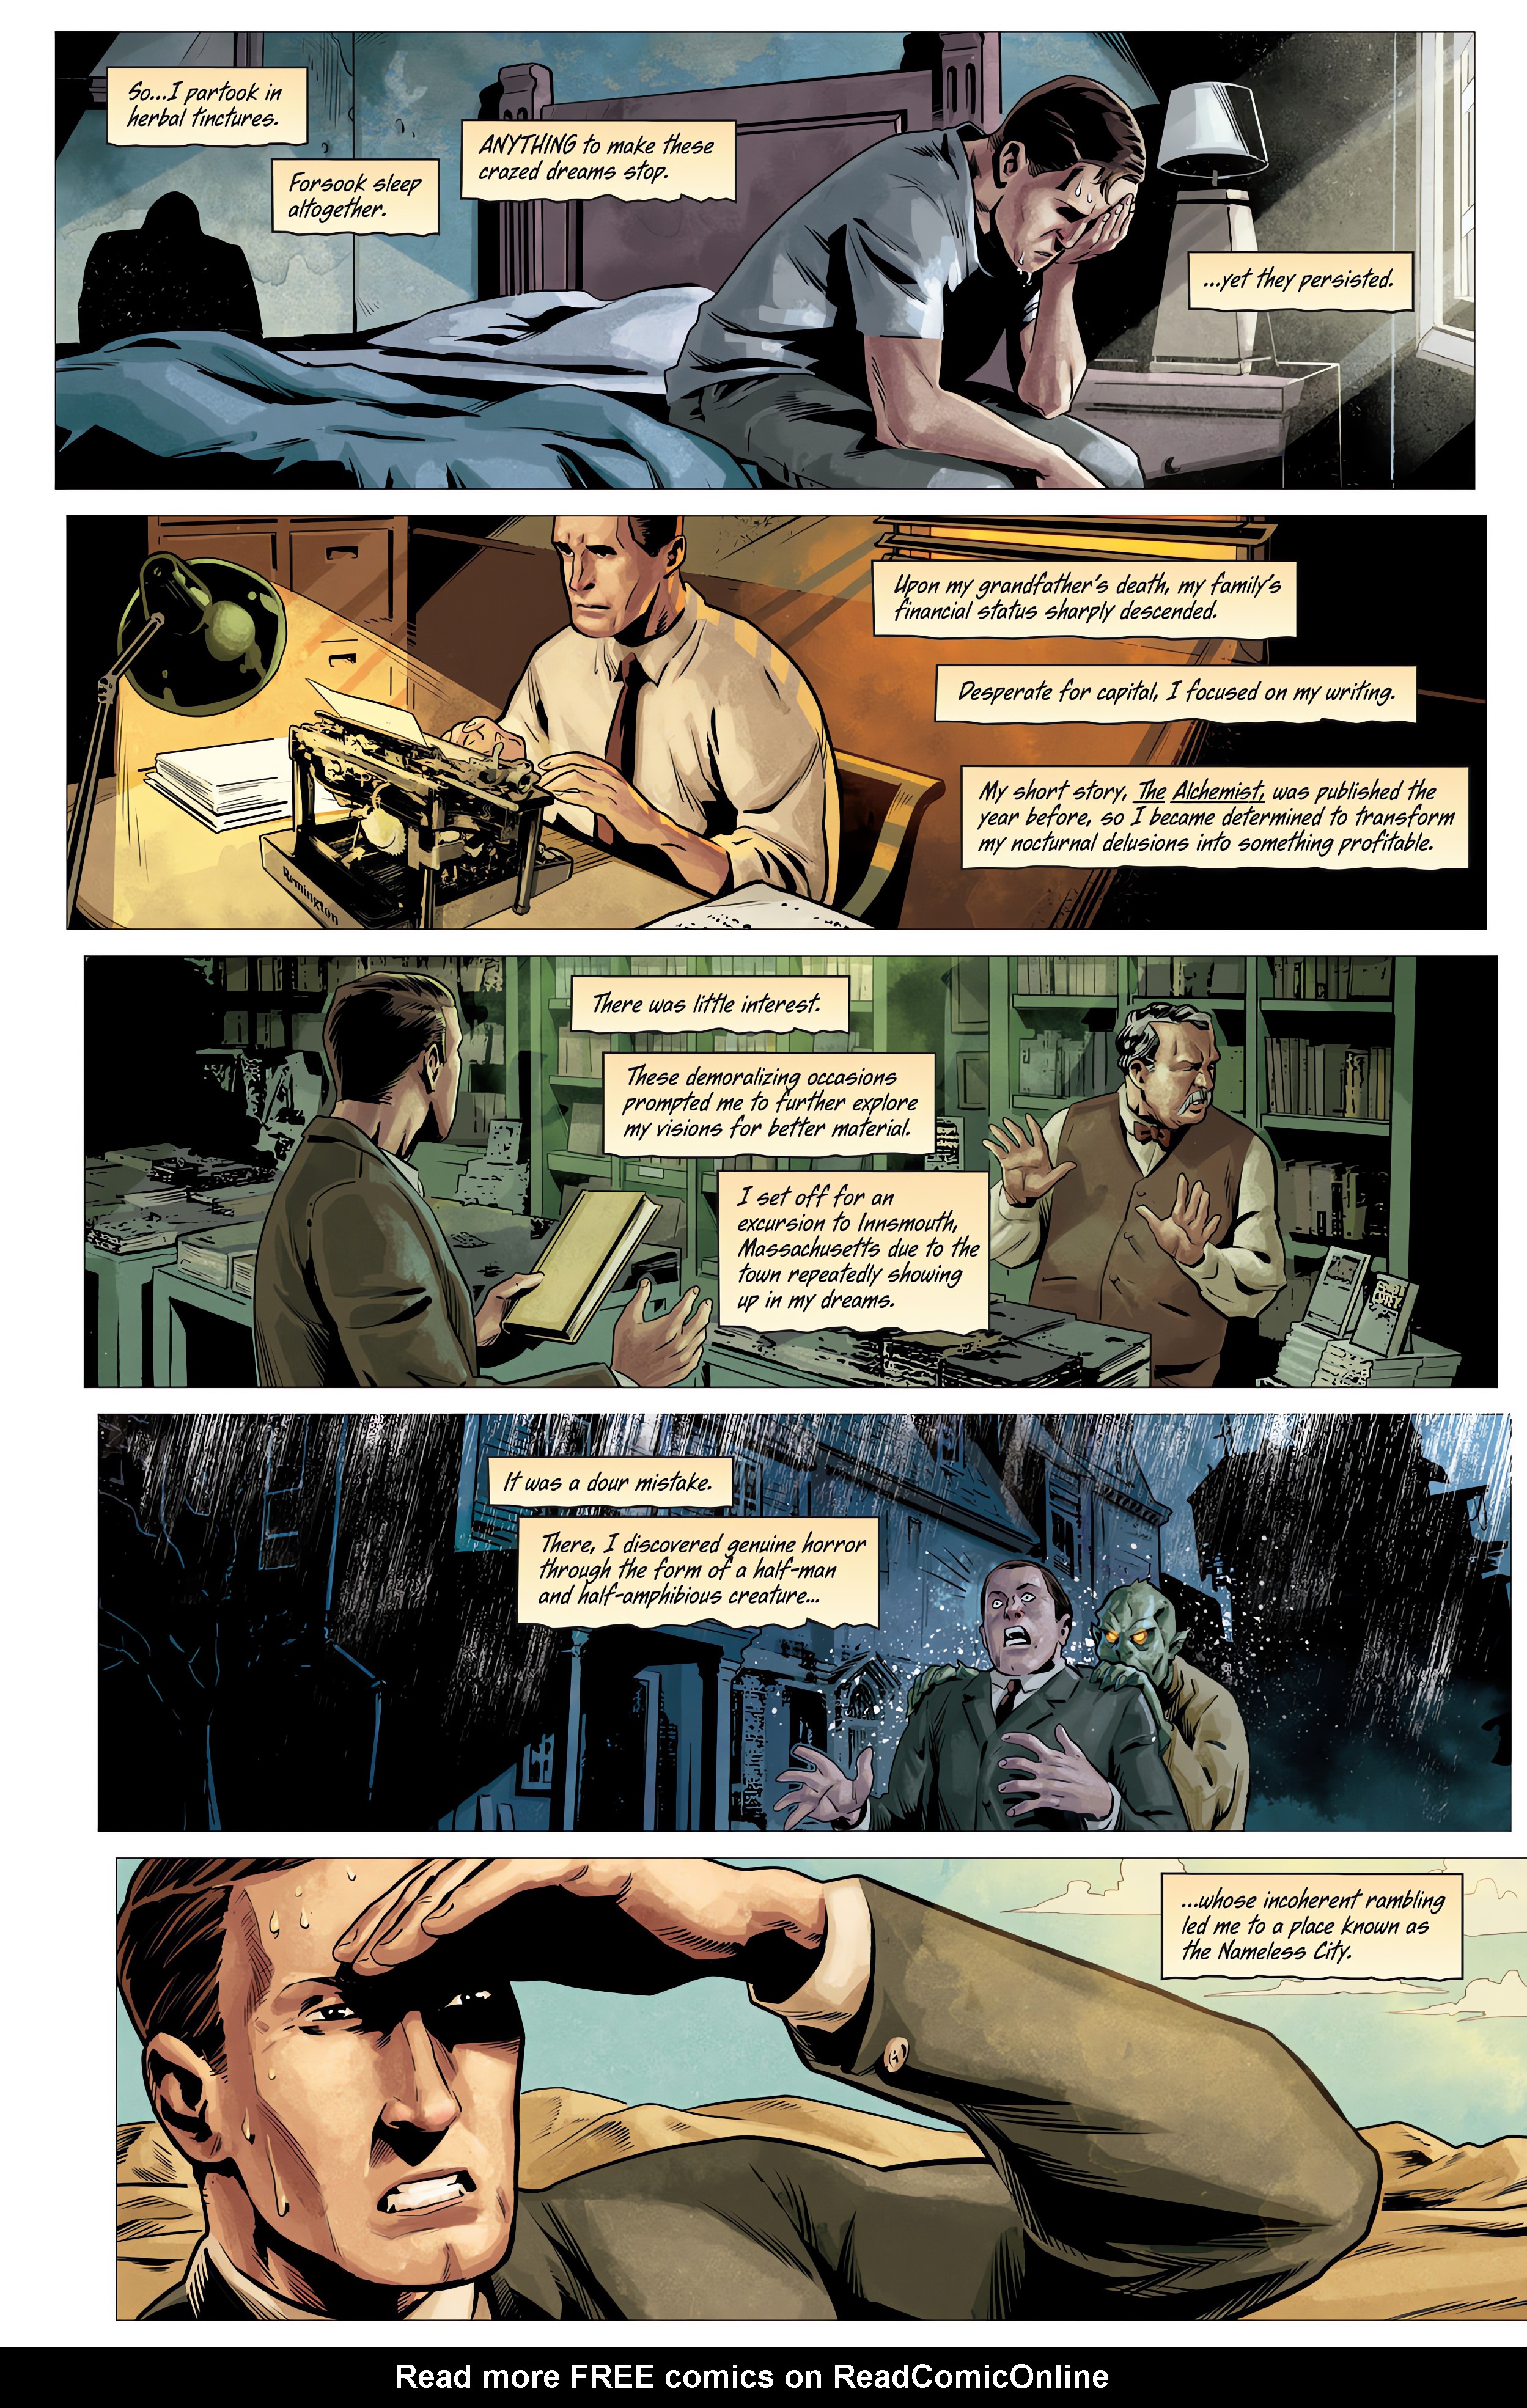 Read online Lovecraft: The Call of Cthulhu comic -  Issue # Full - 9